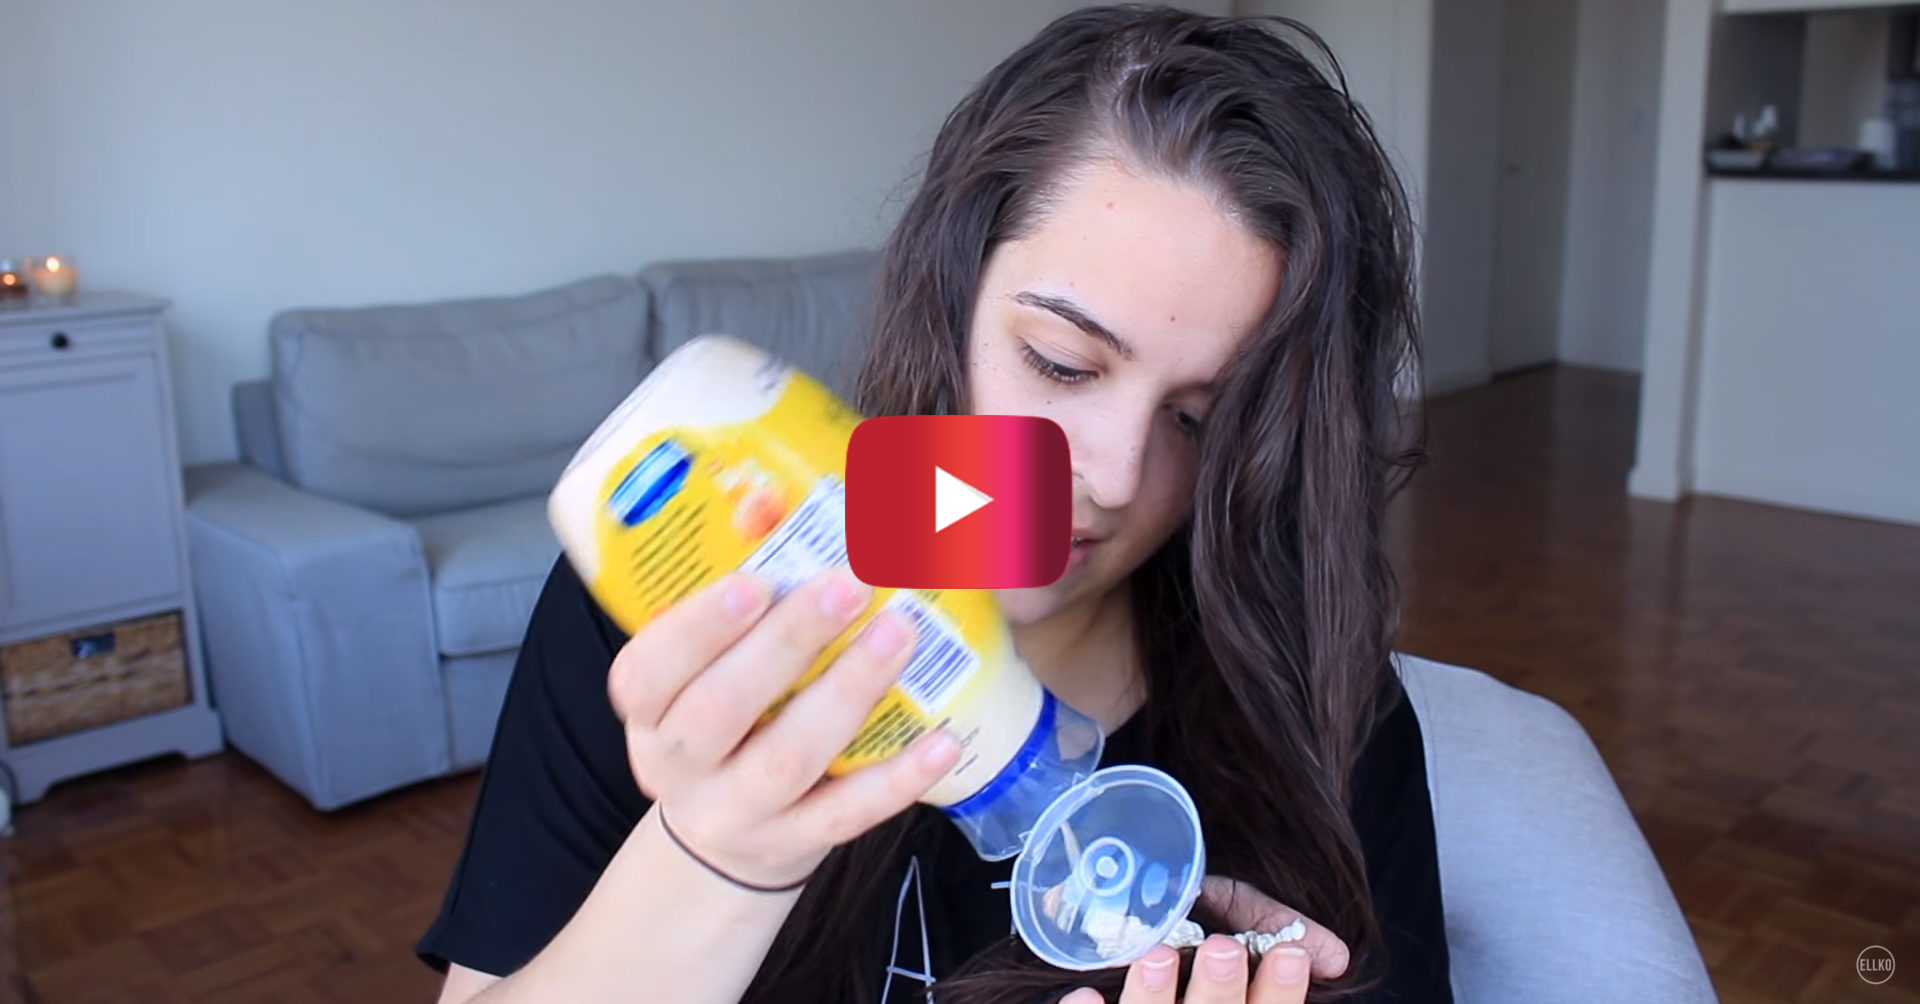 This Woman Puts Mayo On Her Hair and OMG It Actually Works! - Rare